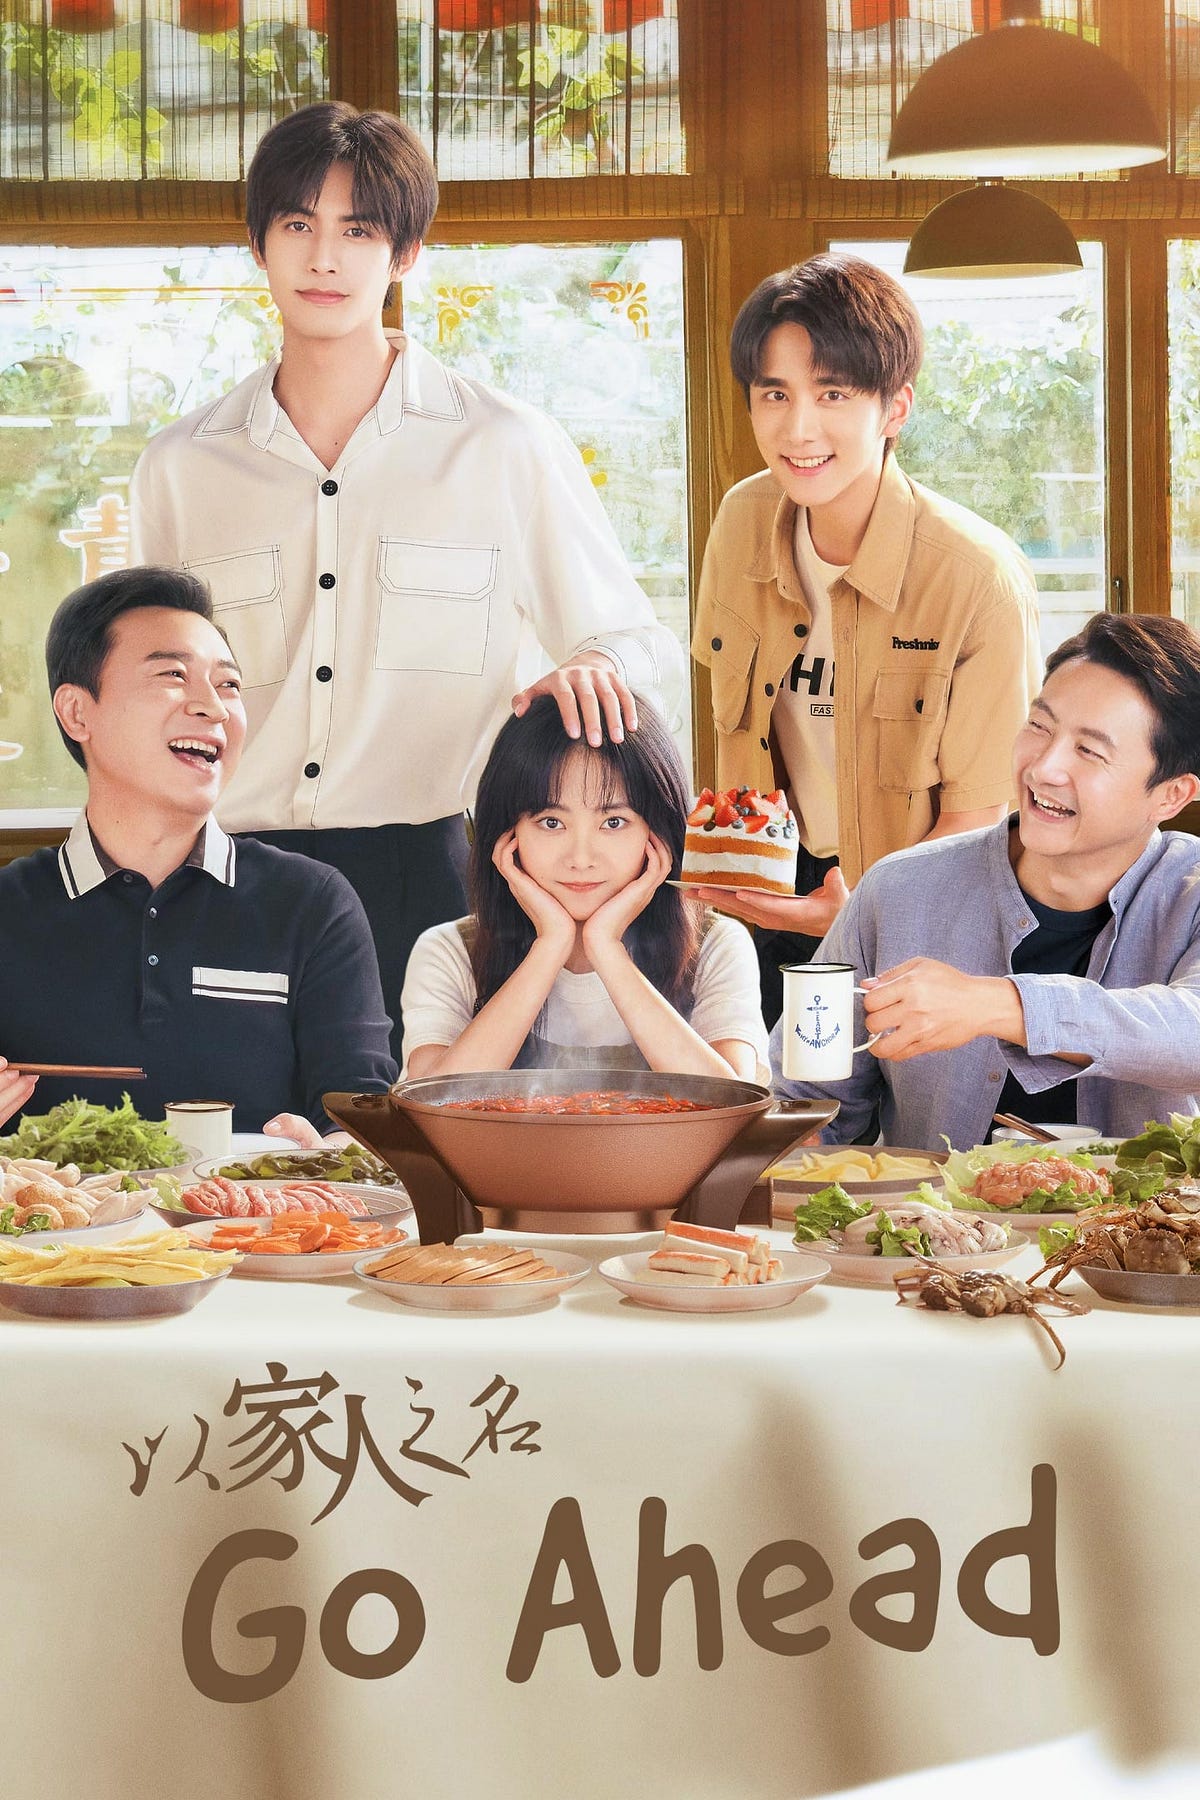 [EngSub] Go Ahead Episode 33–34 “Full’Episodes” Chinese Drama 2020 | by